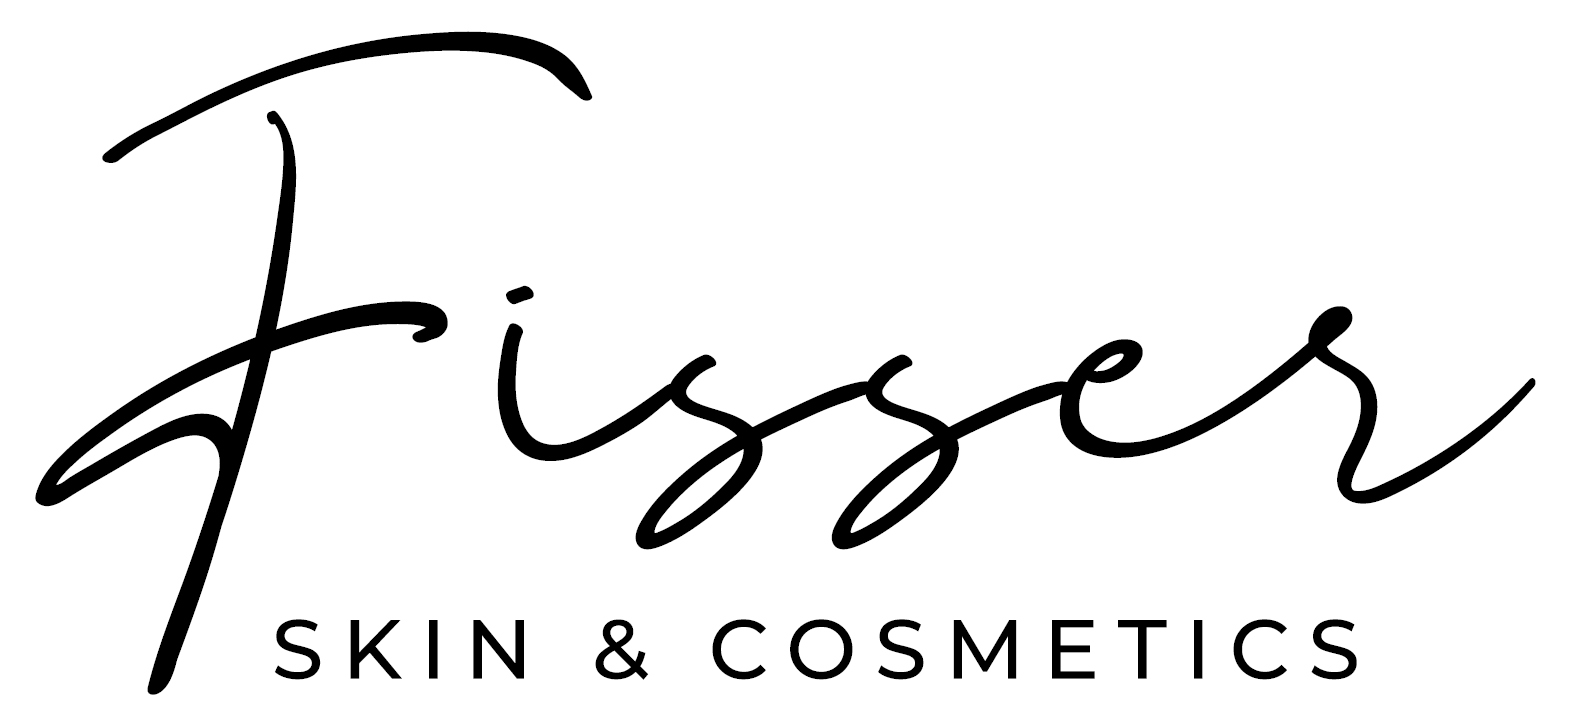 Fisser Skin and Cosmetics